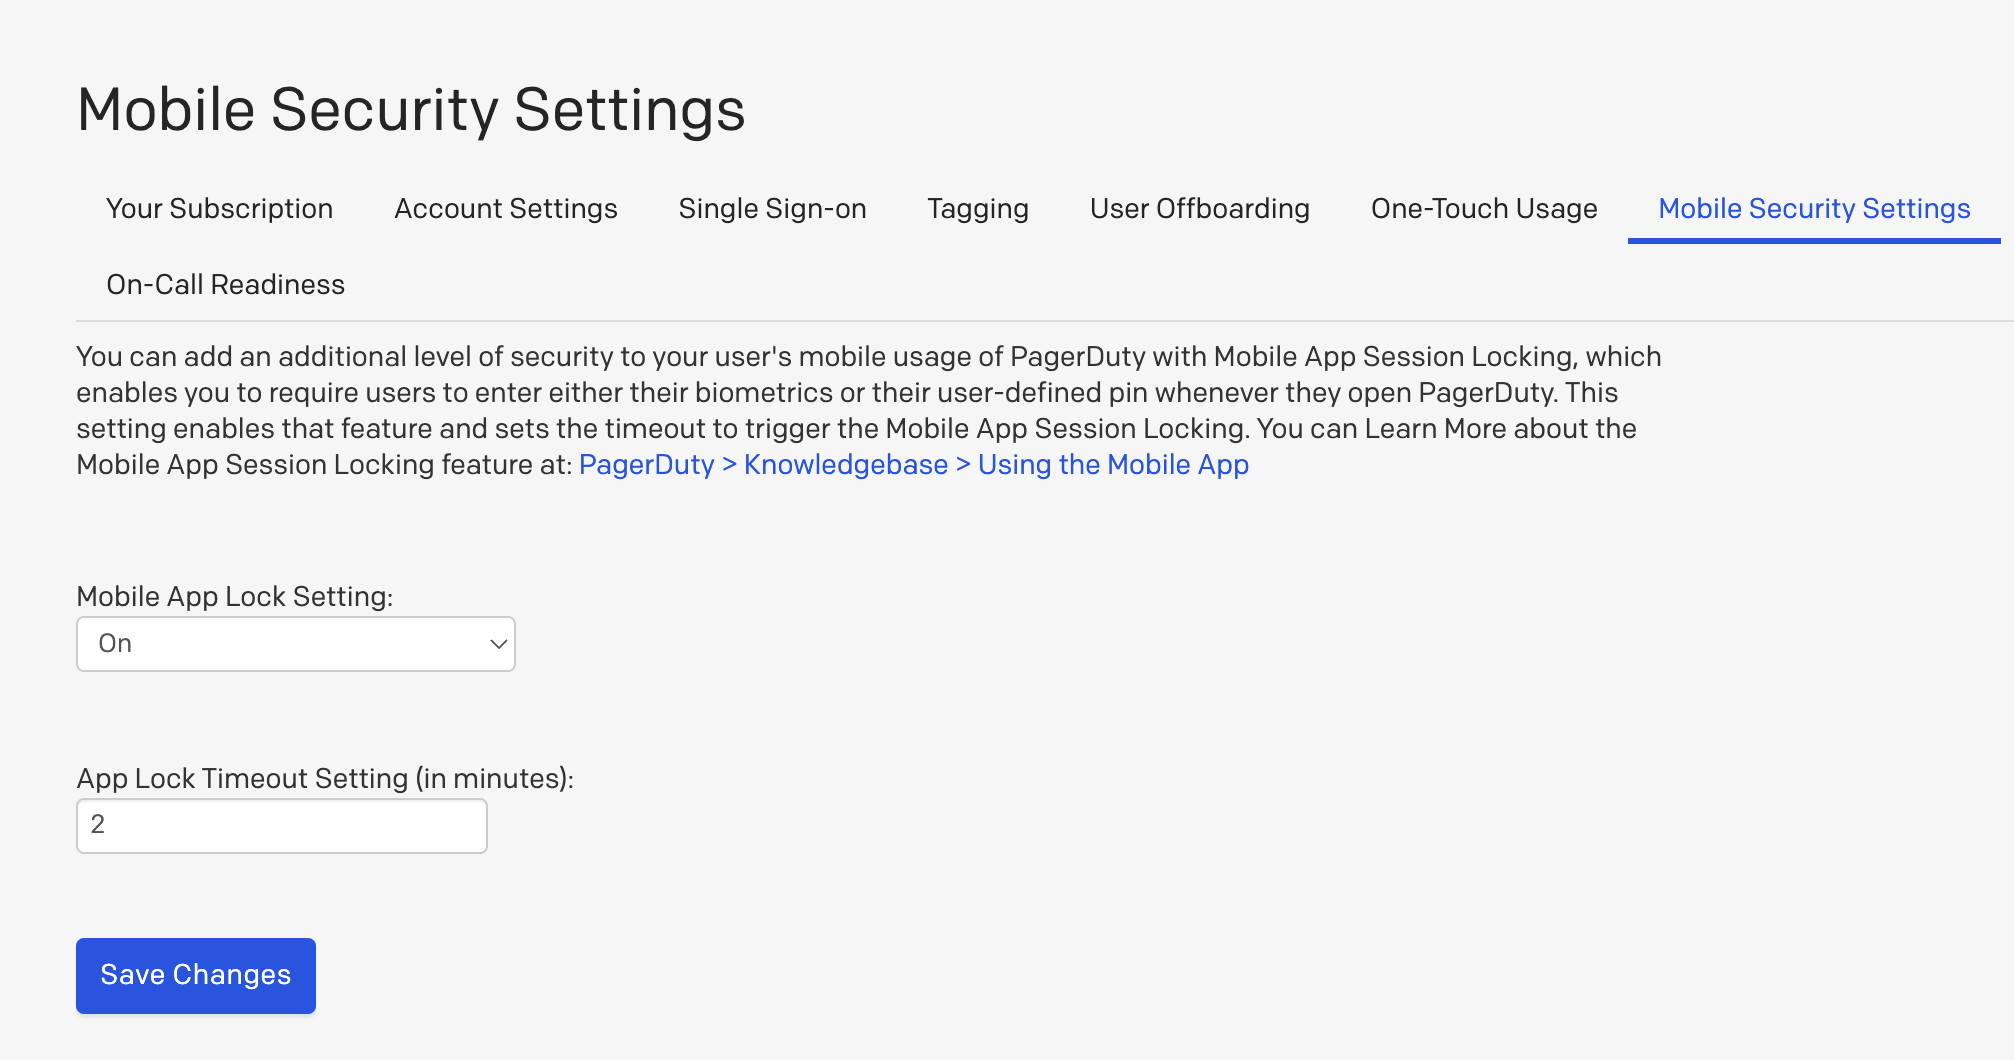 Mobile security settings